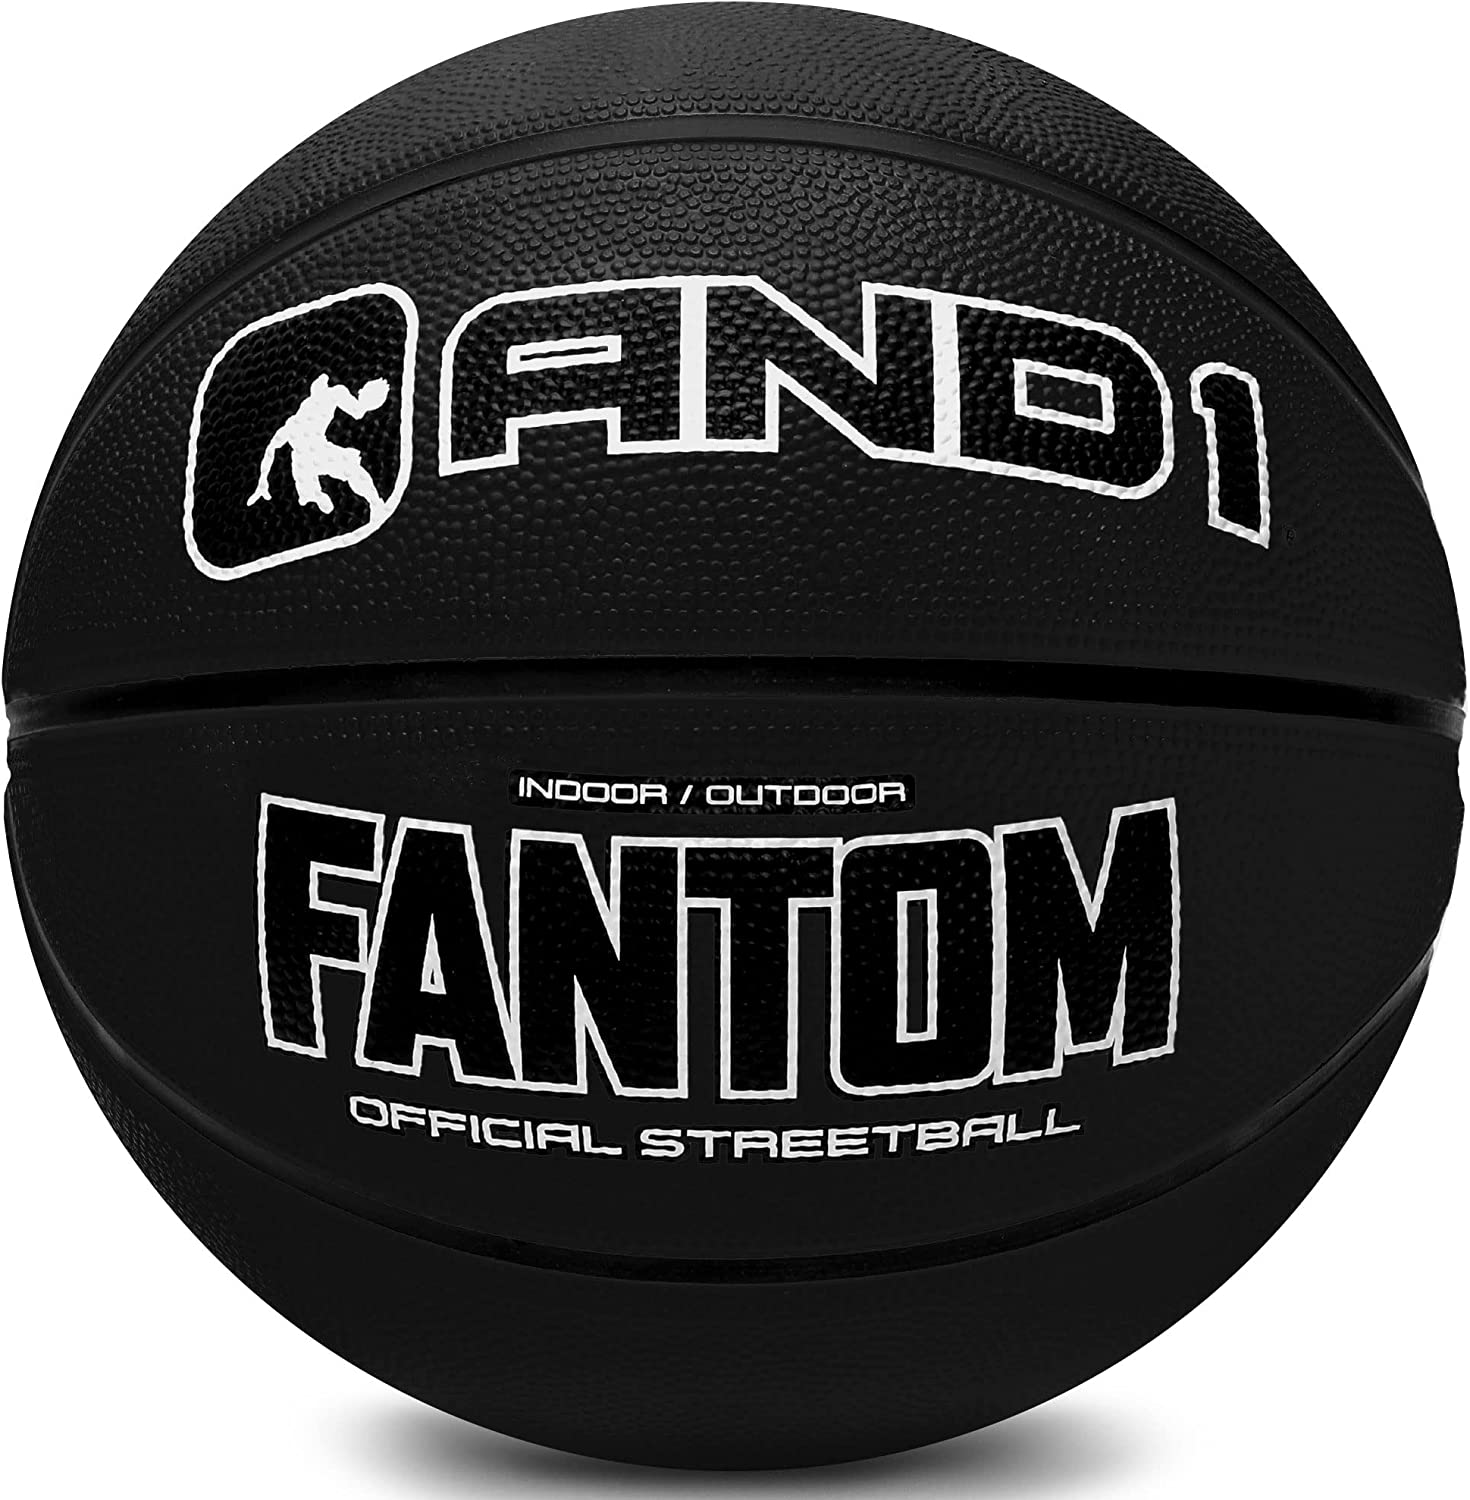 AND1 Fantom Rubber Basketball for ONLY $5 (Was $12.99)!! | Dollar Savers